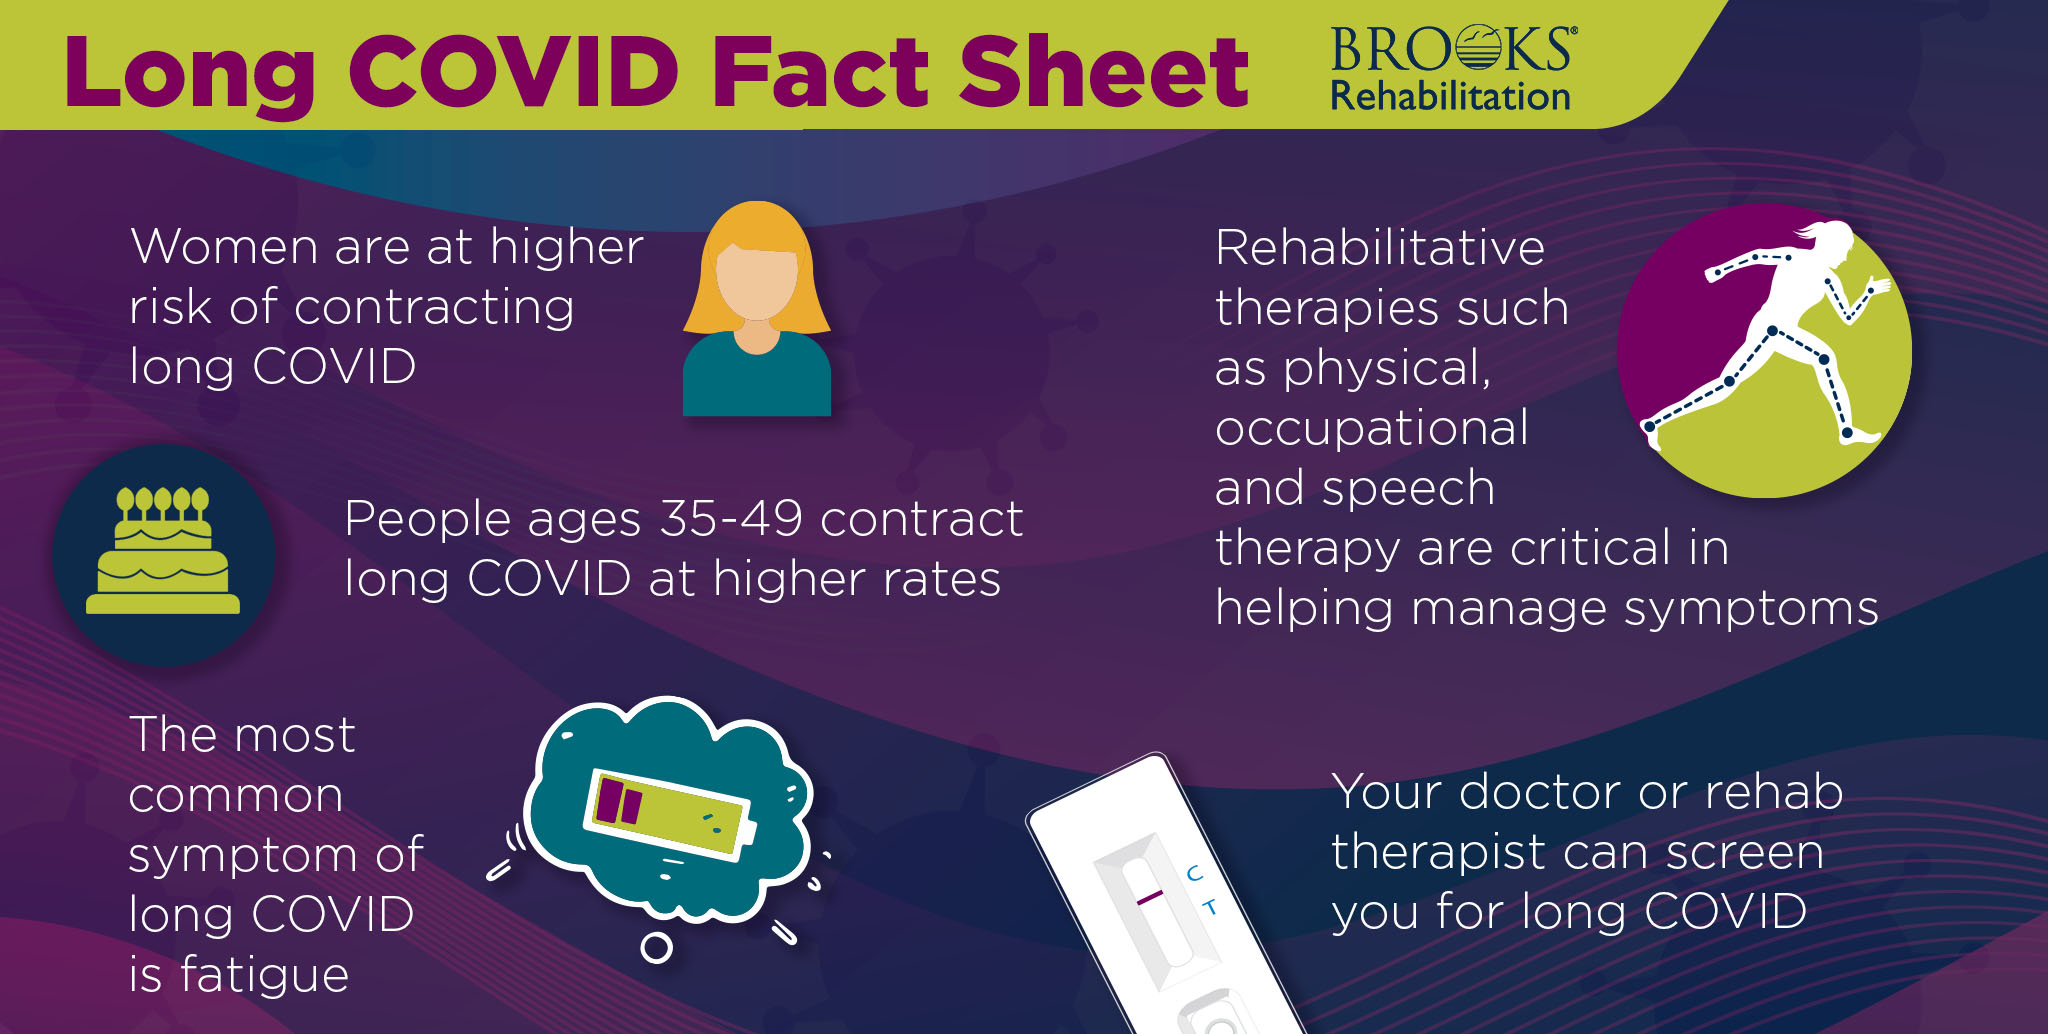 Long COVID fact sheet for risk factors and treatments. 